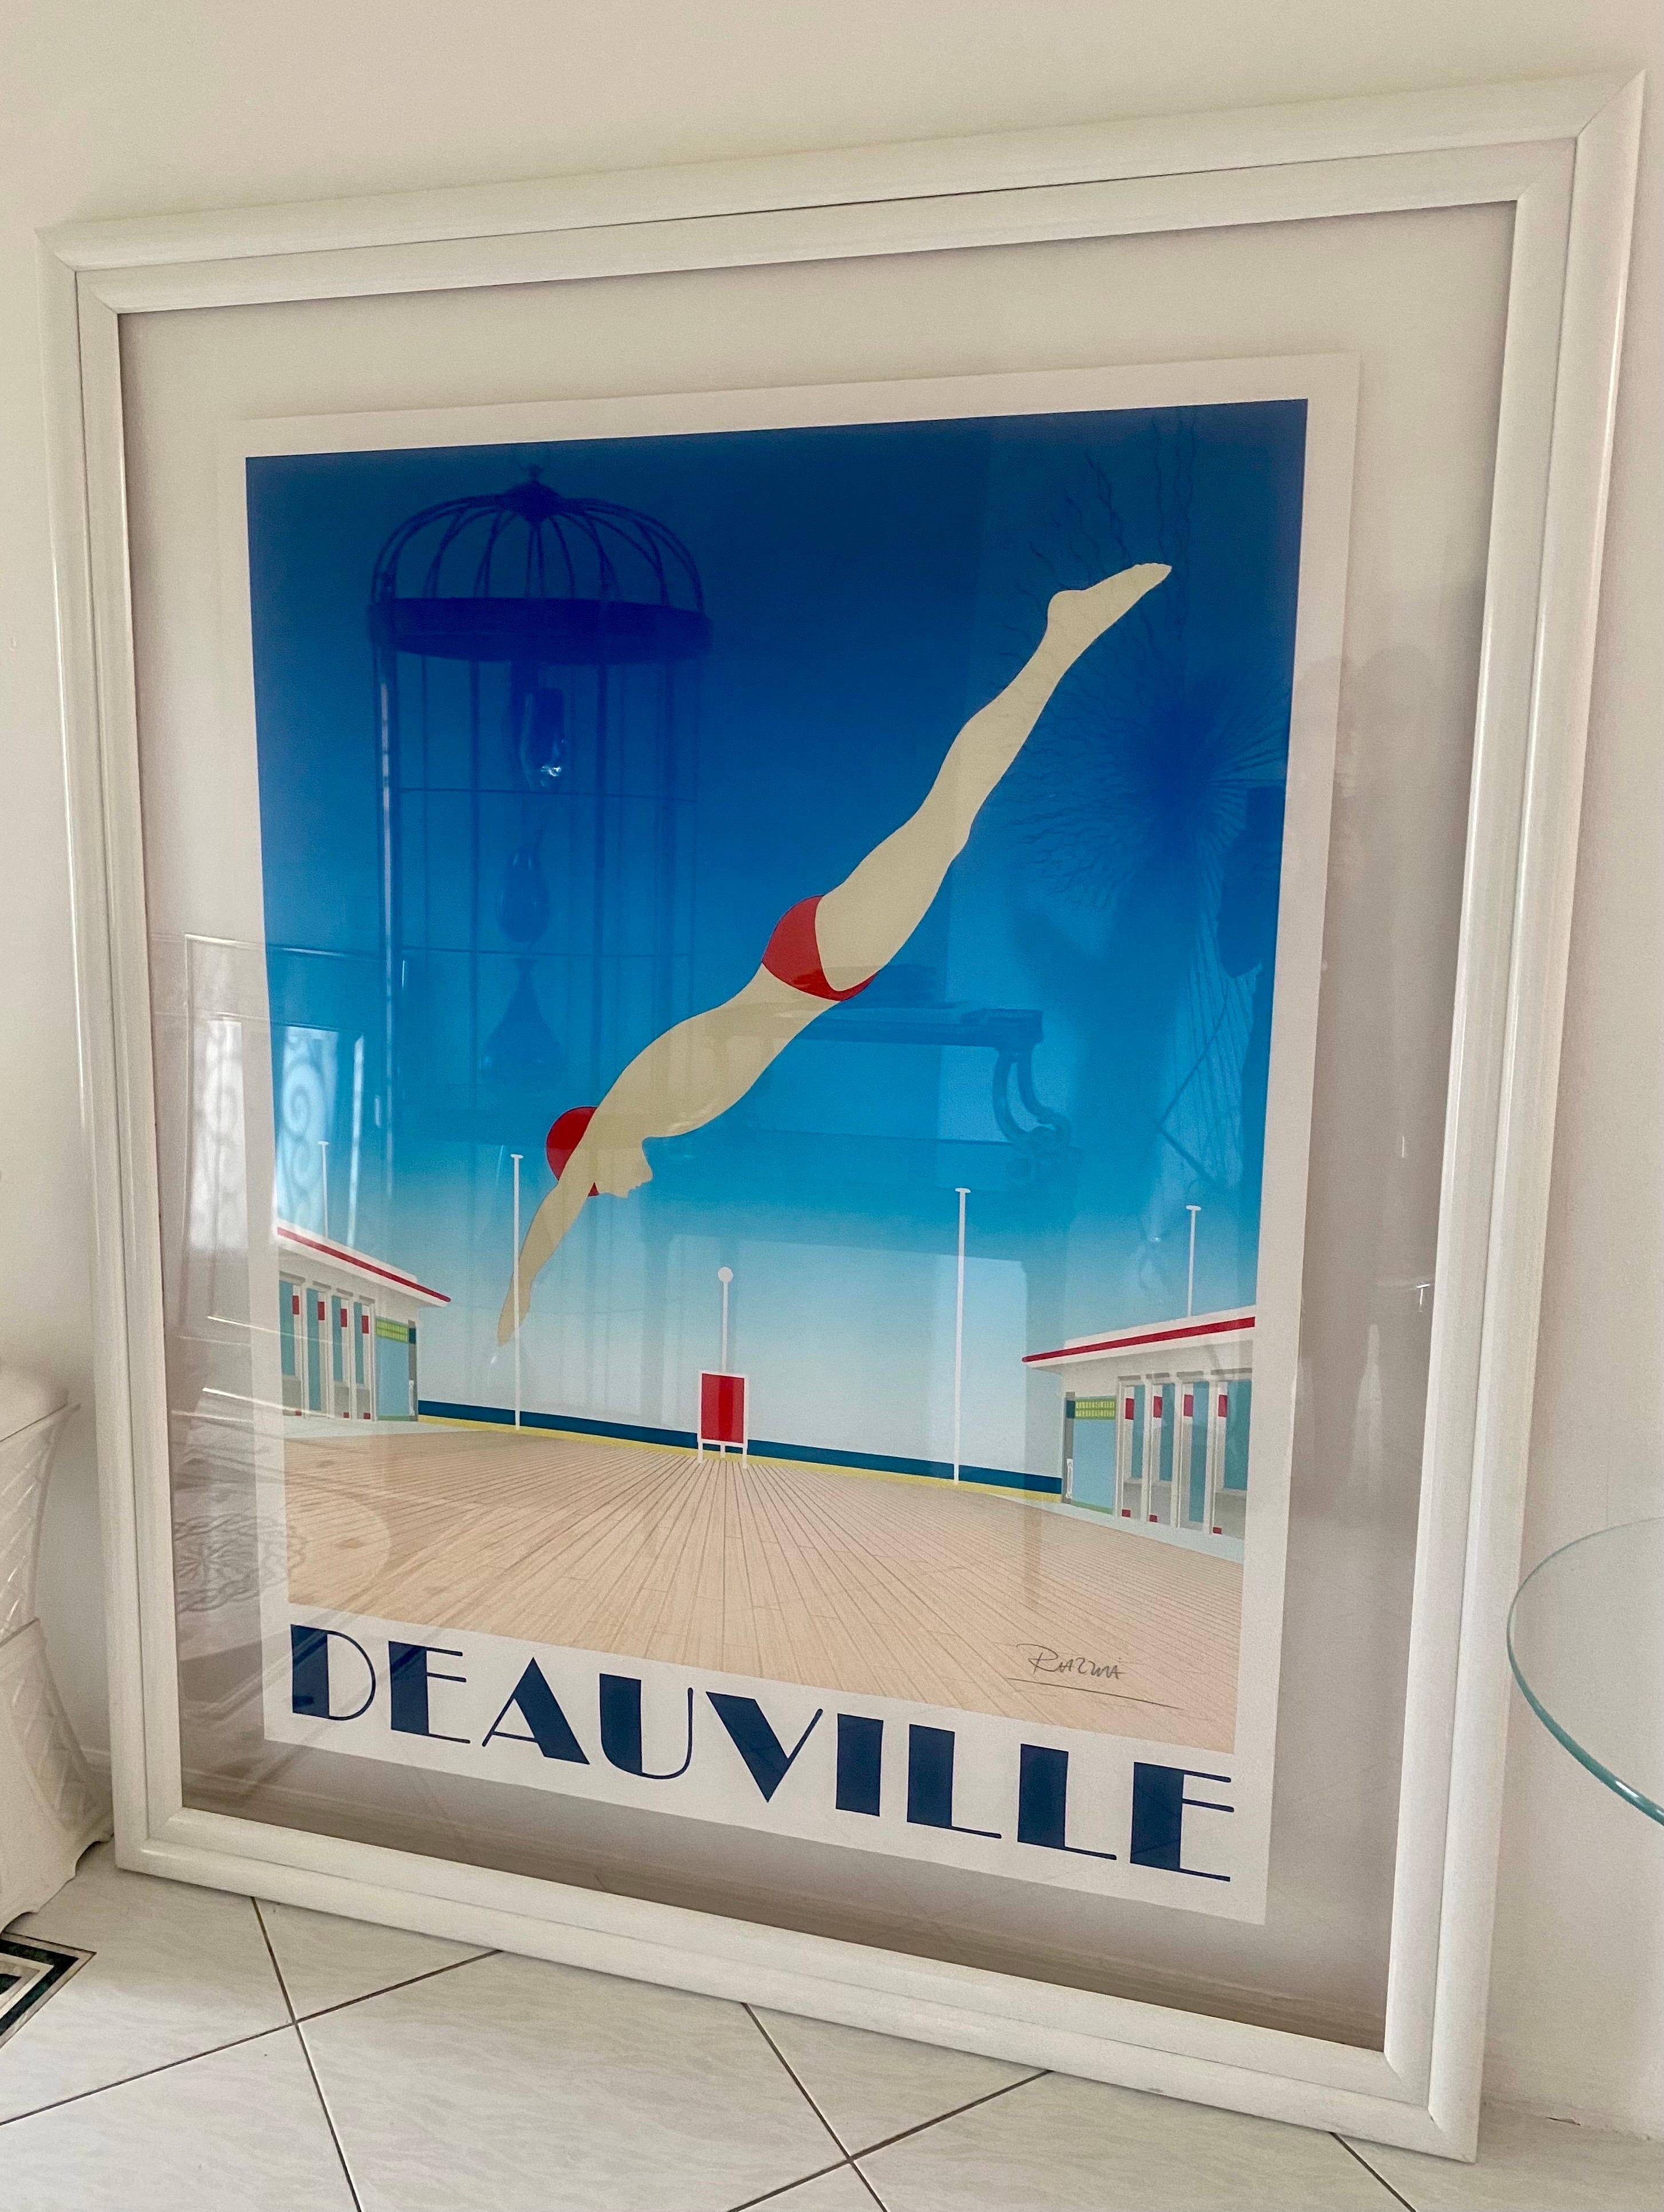 An original hand signed lithograph poster with linen backing by Gerard Courbouleix Deneriaz in custom made frame of museum quality acrylic and white lacquered wood. Poster measures 46.5 inches wide by 60 inches high. See listed measurements for